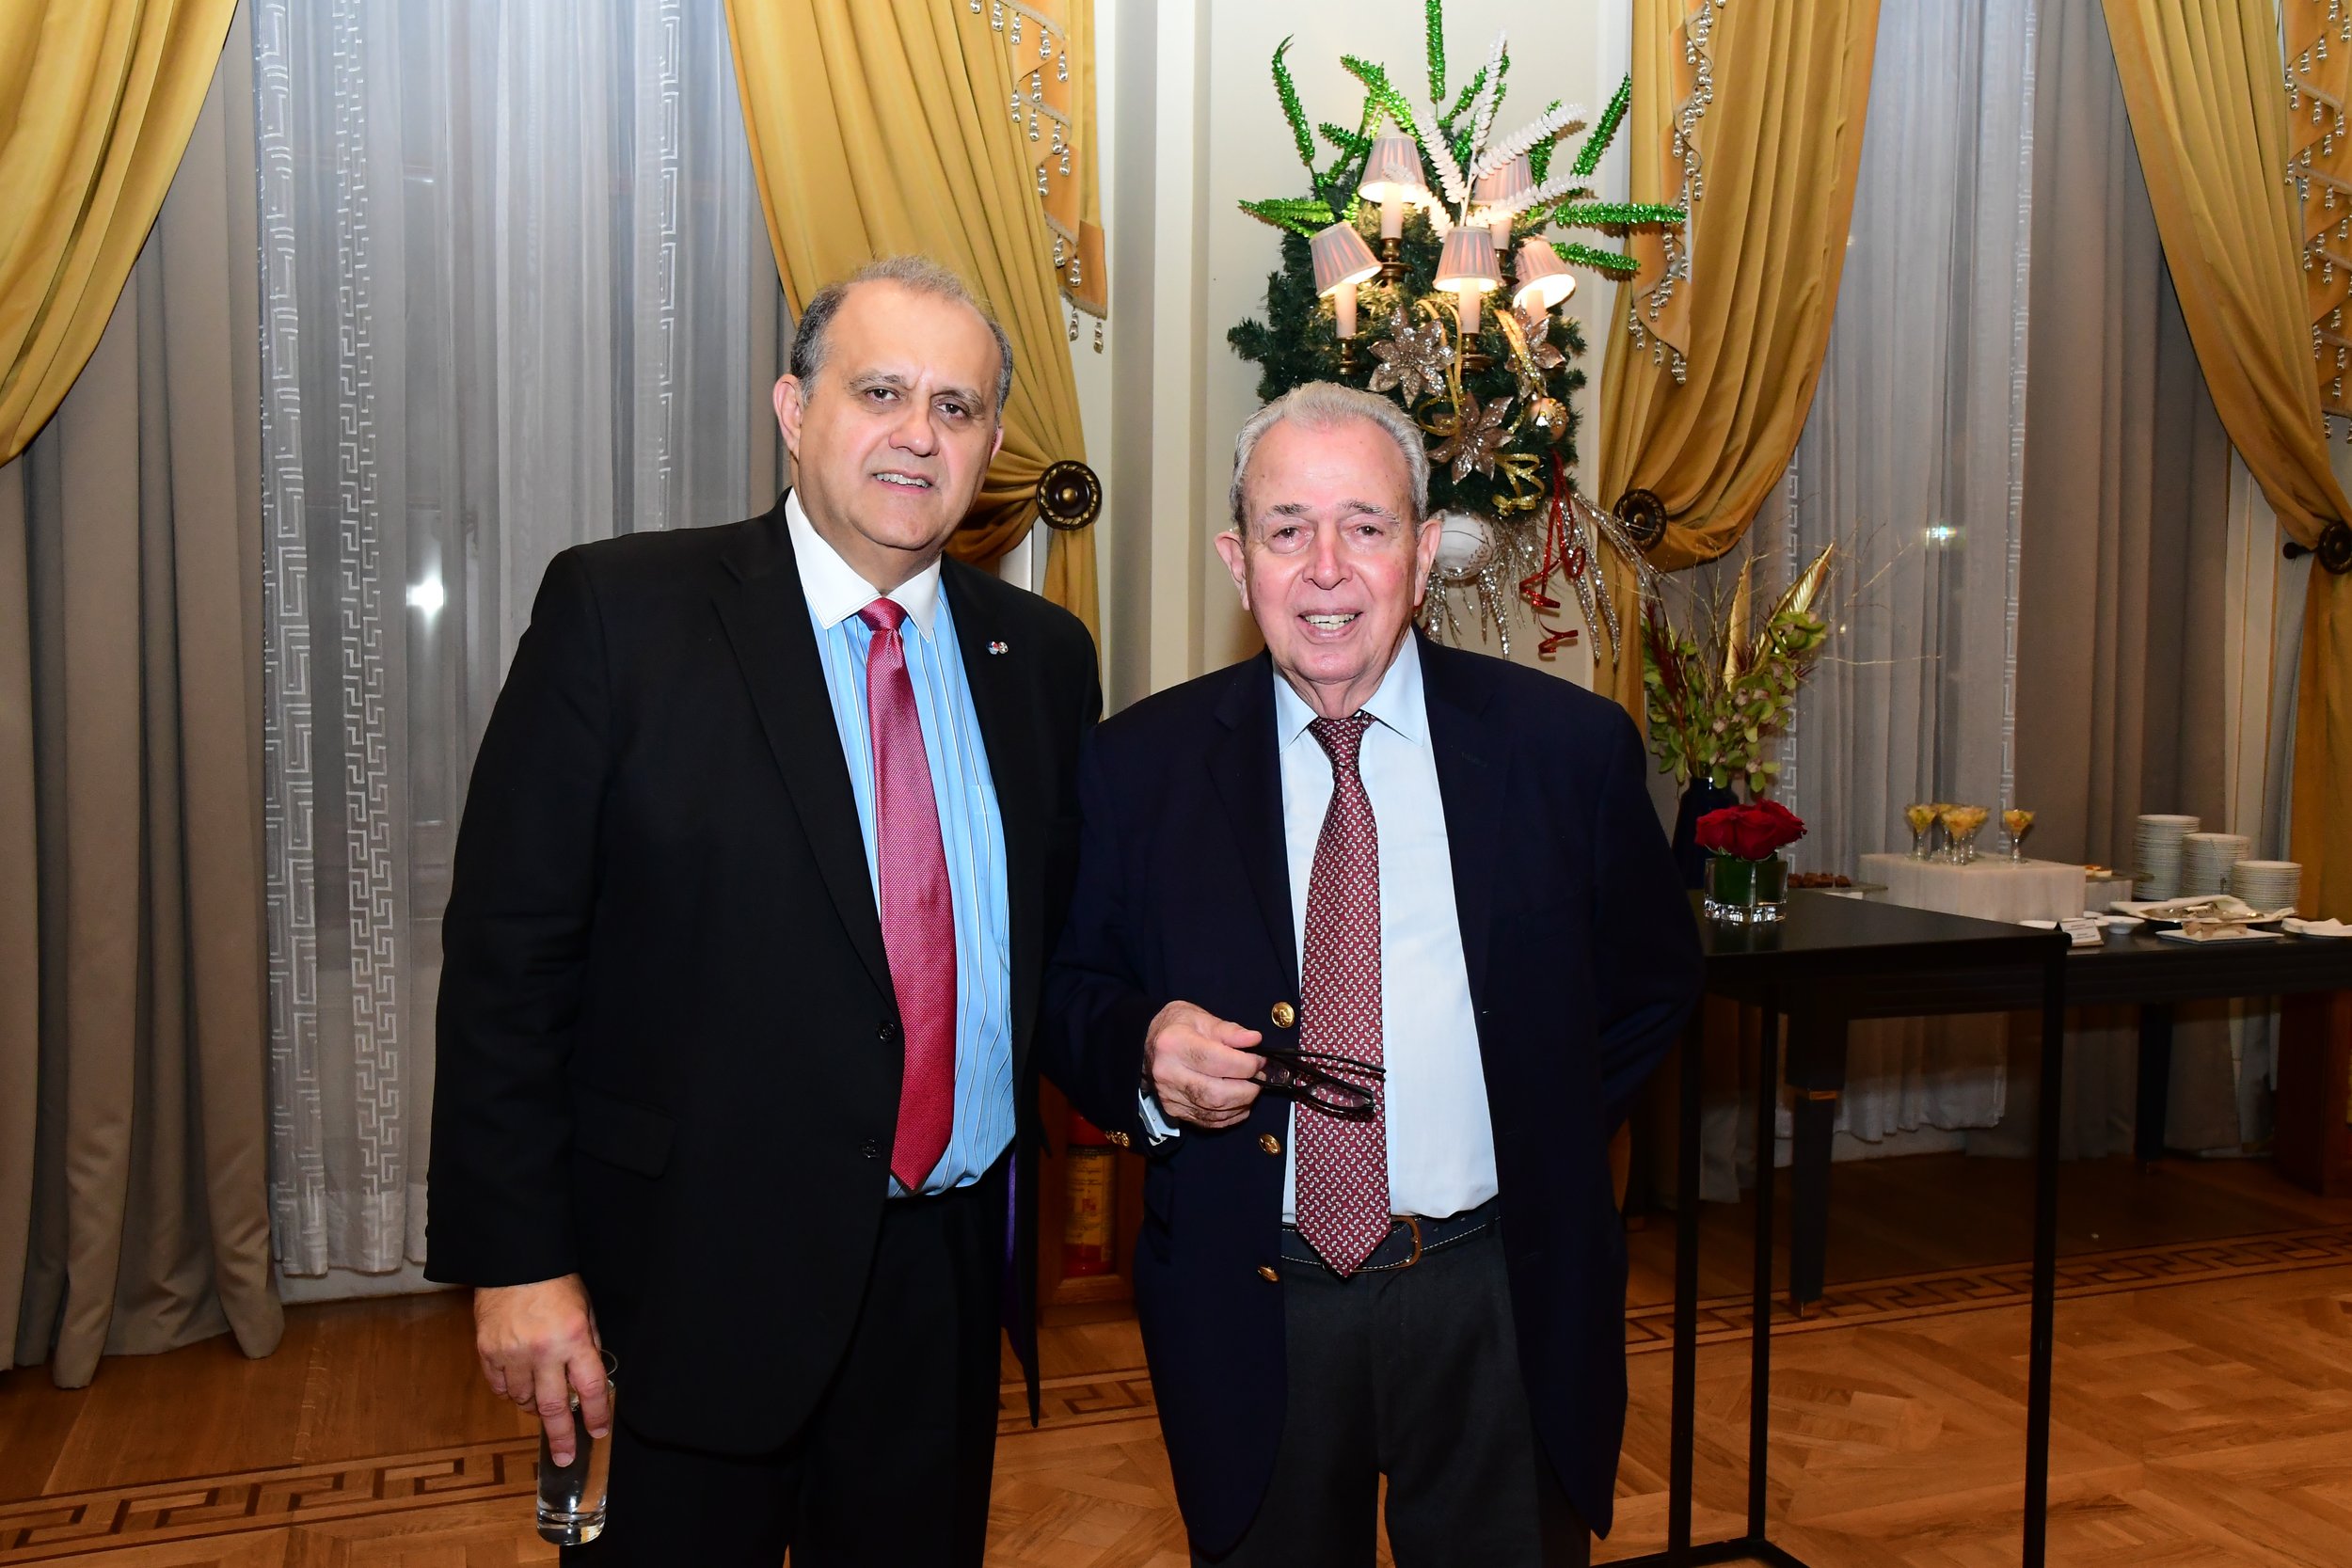  Larigakis with former president of AHI Athens Chapter George Economou 